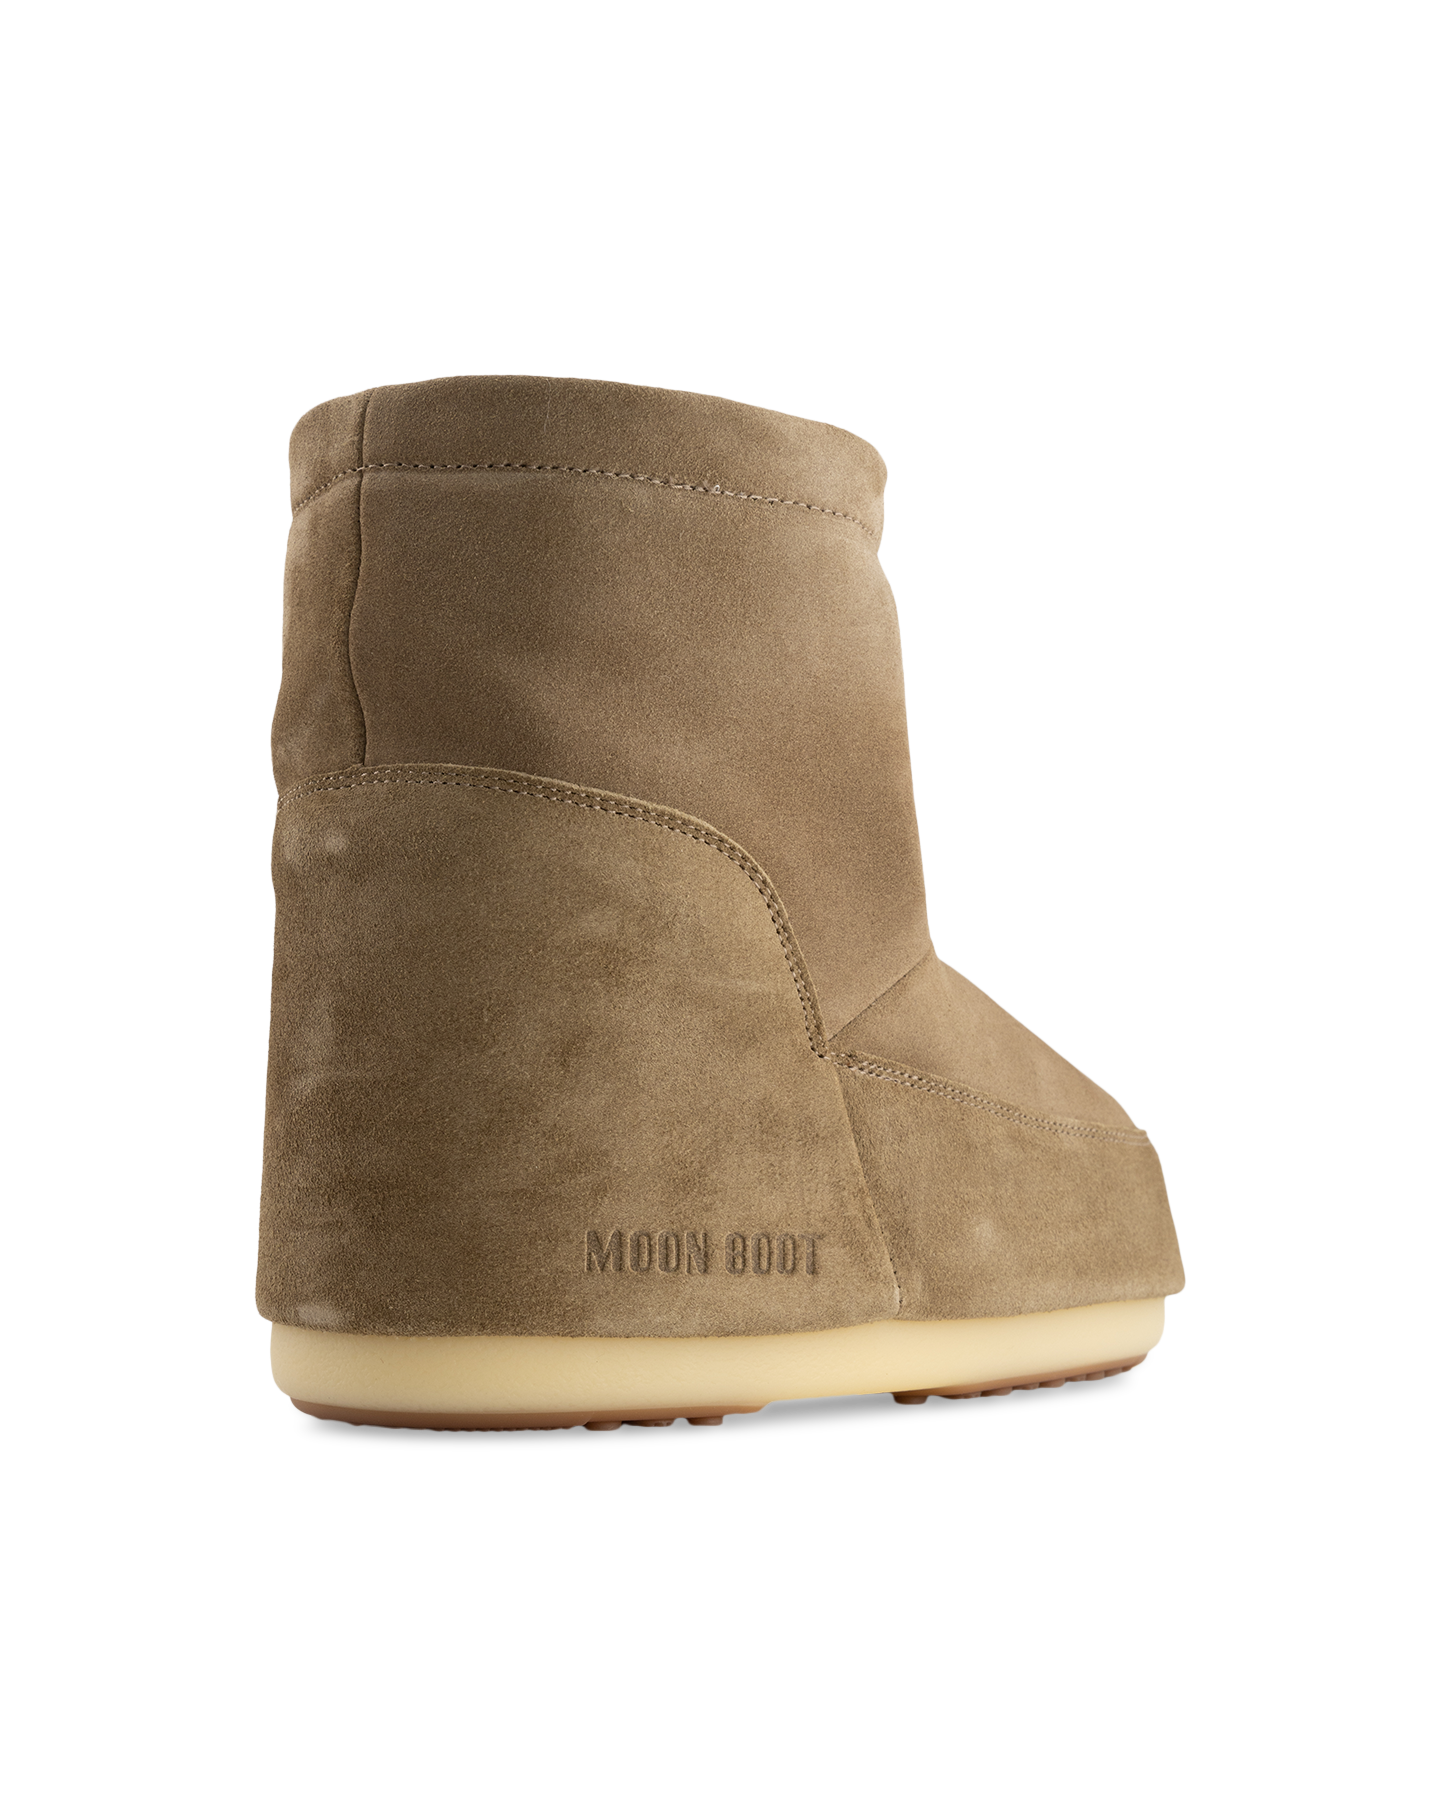 Moonboot Mb Icon Low Nolace Suede ZAND 3